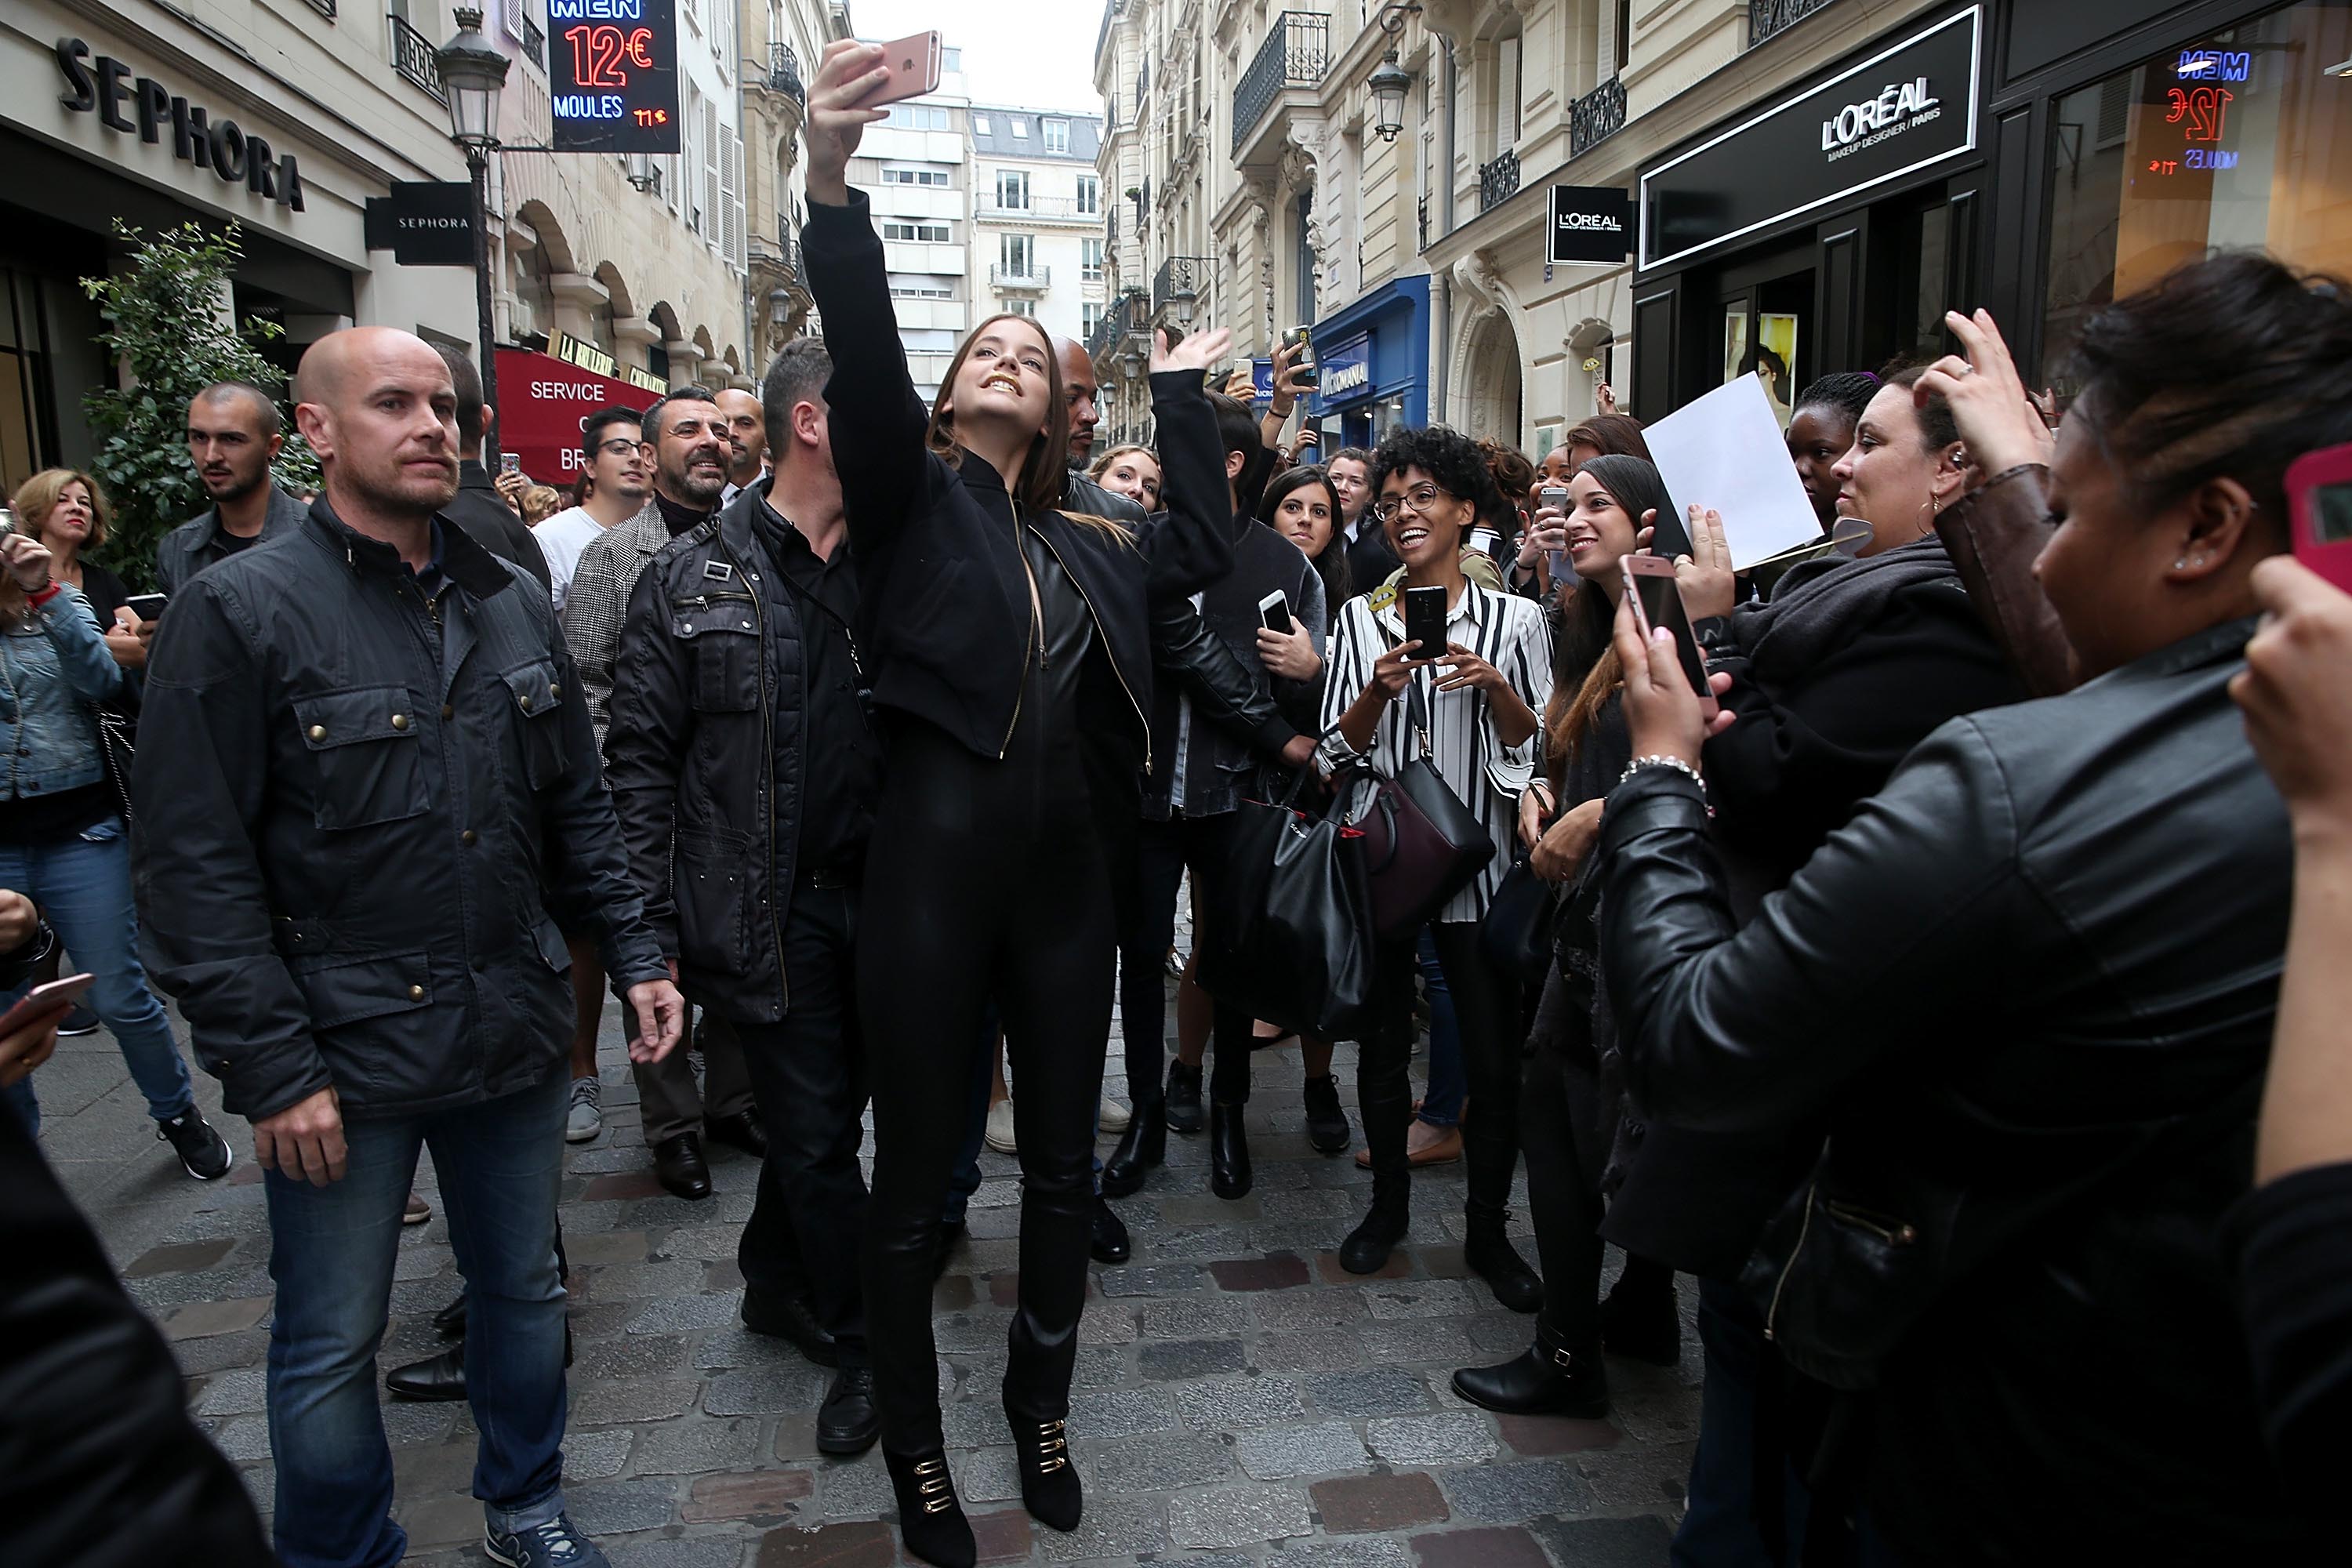 Barbara Palvin attends the opening of the first L’Oreal Paris store